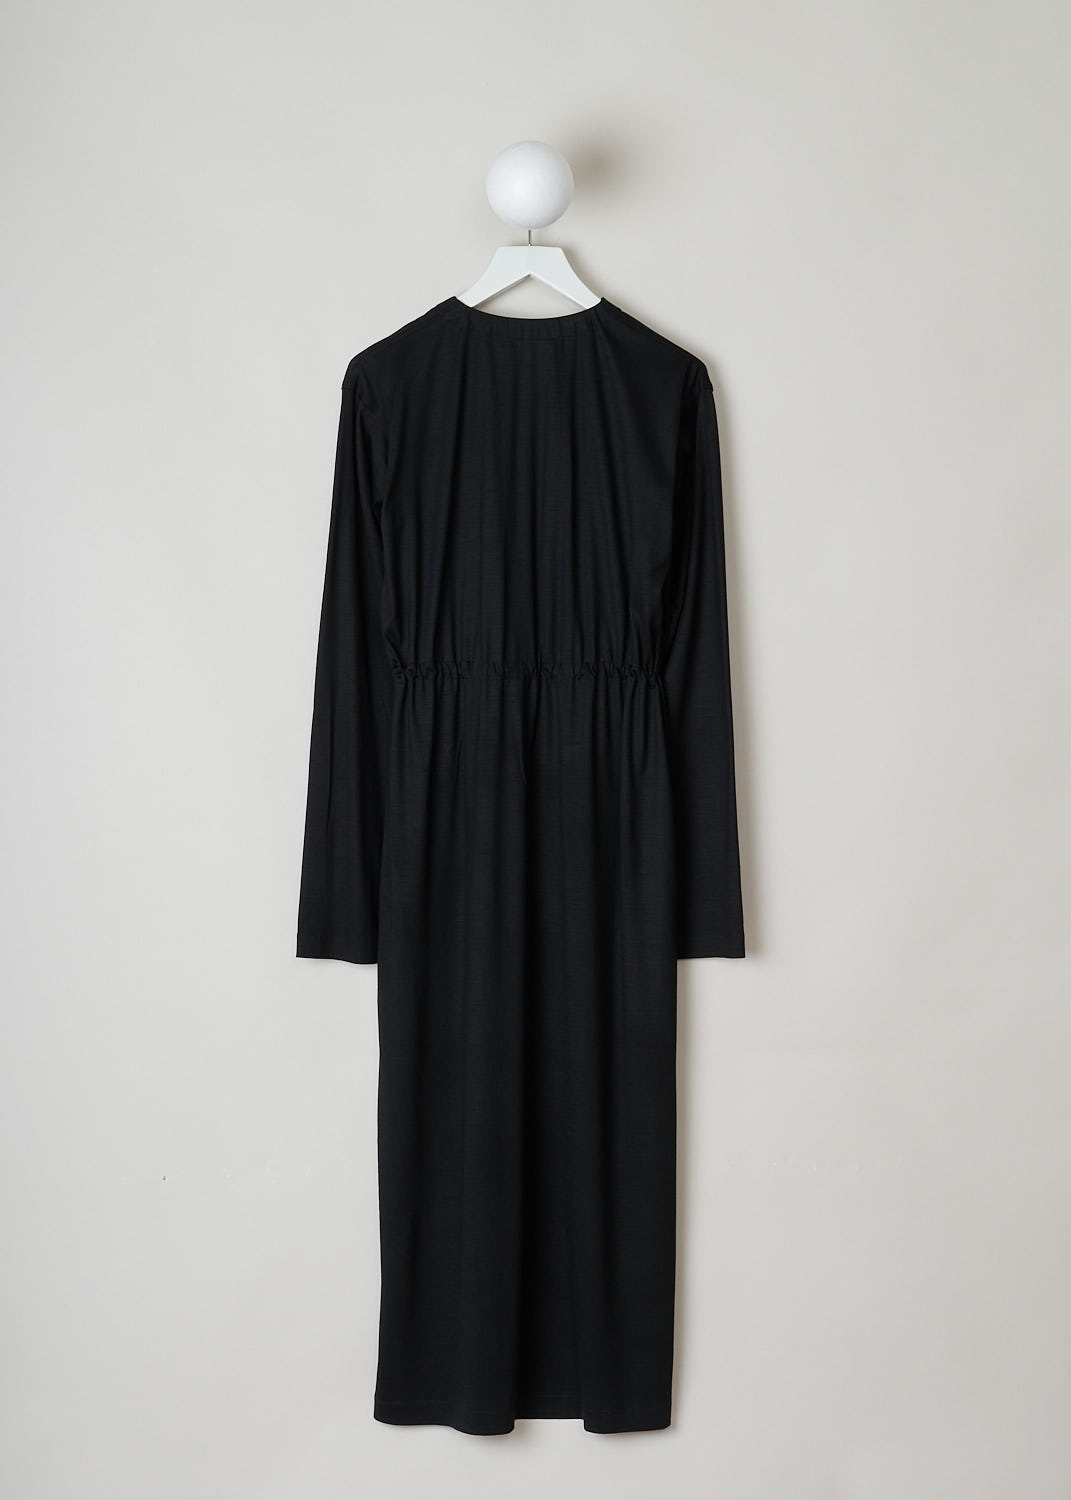 SOFIE Dâ€™HOORE, LONG SLEEVE BLACK DRESS, DARA_WOJE_BLACK, Black, Back, This black maxi dress features a gathered elasticated neckline. The waist is also elasticated, cinching in the waist. Slant pockets can be found concealed in the seam.
